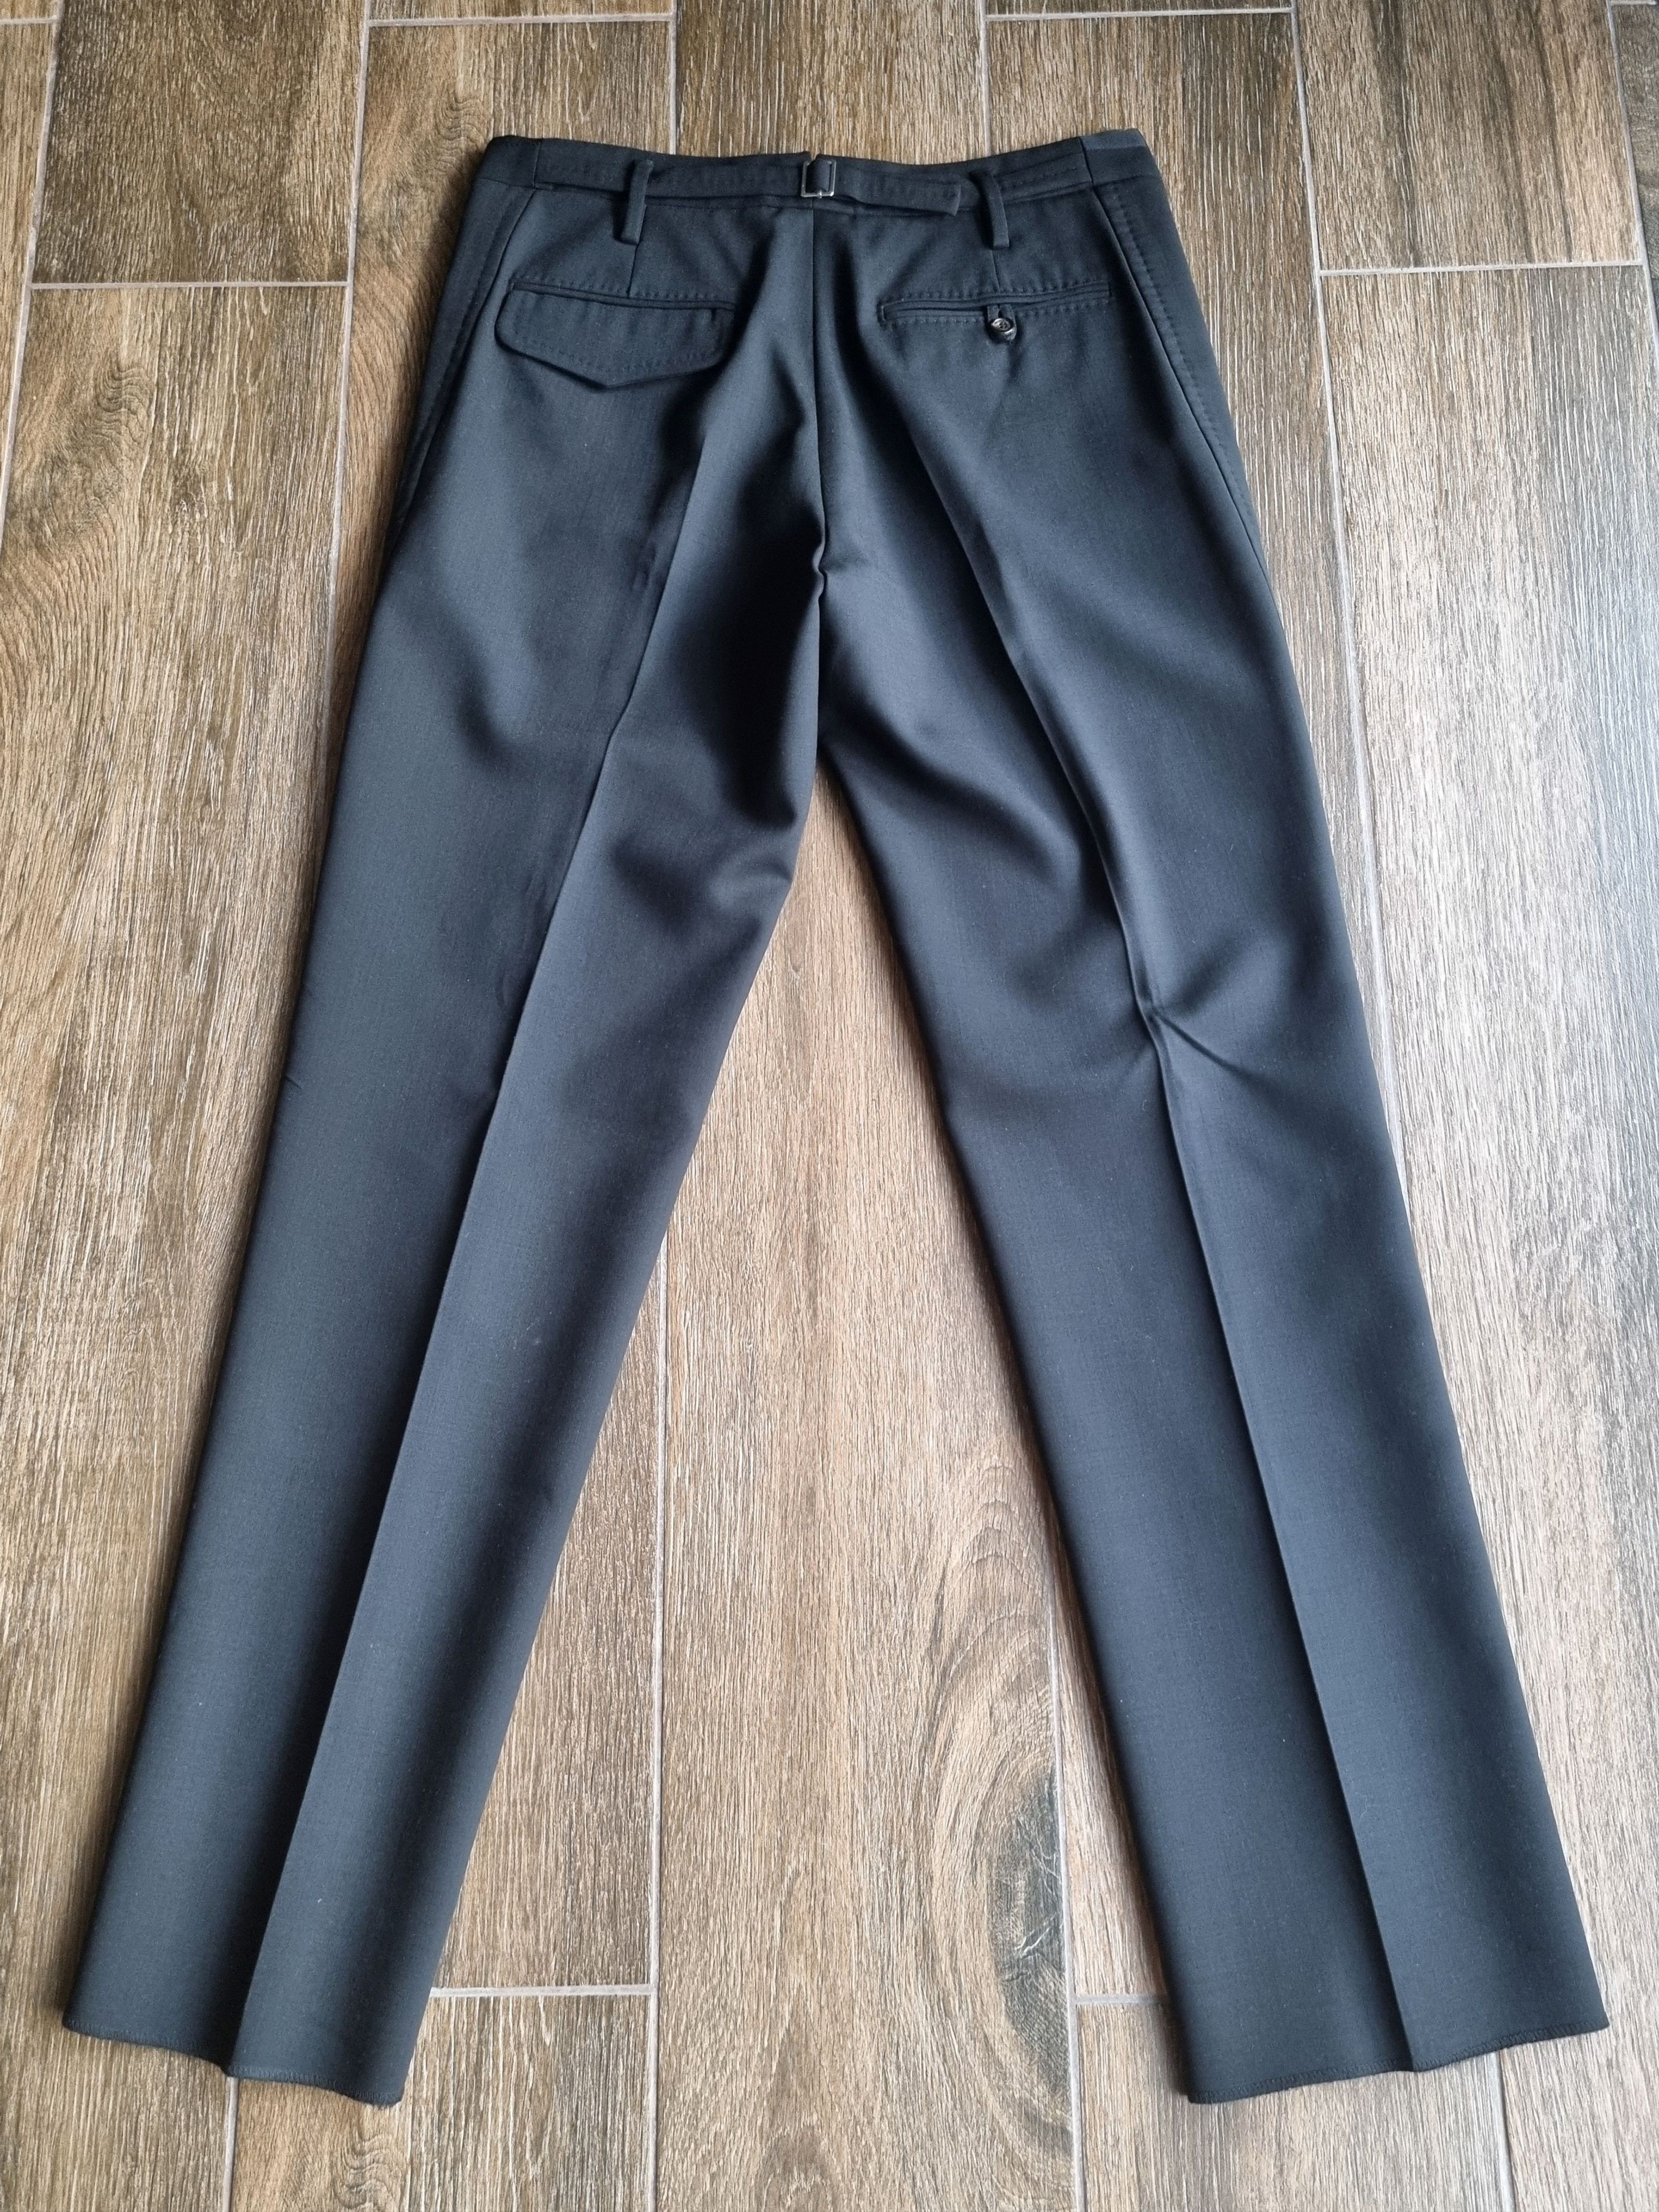 black formal dress wool pants with leather details - 6